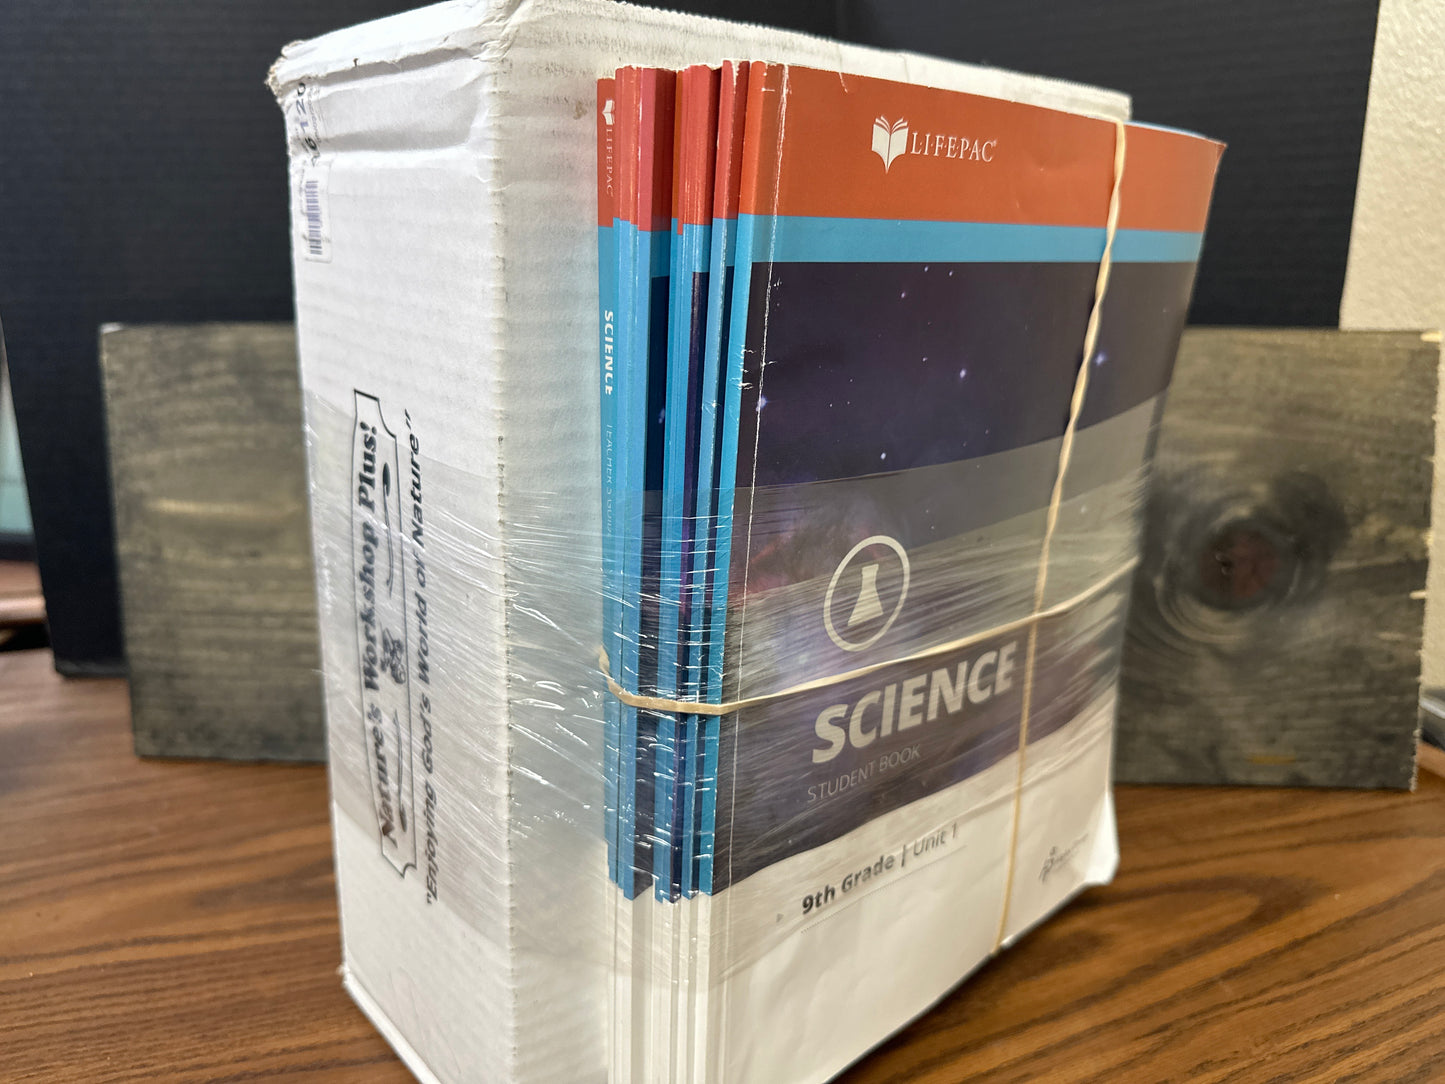 Lifepac Science 9 book set with Lab materials both complete